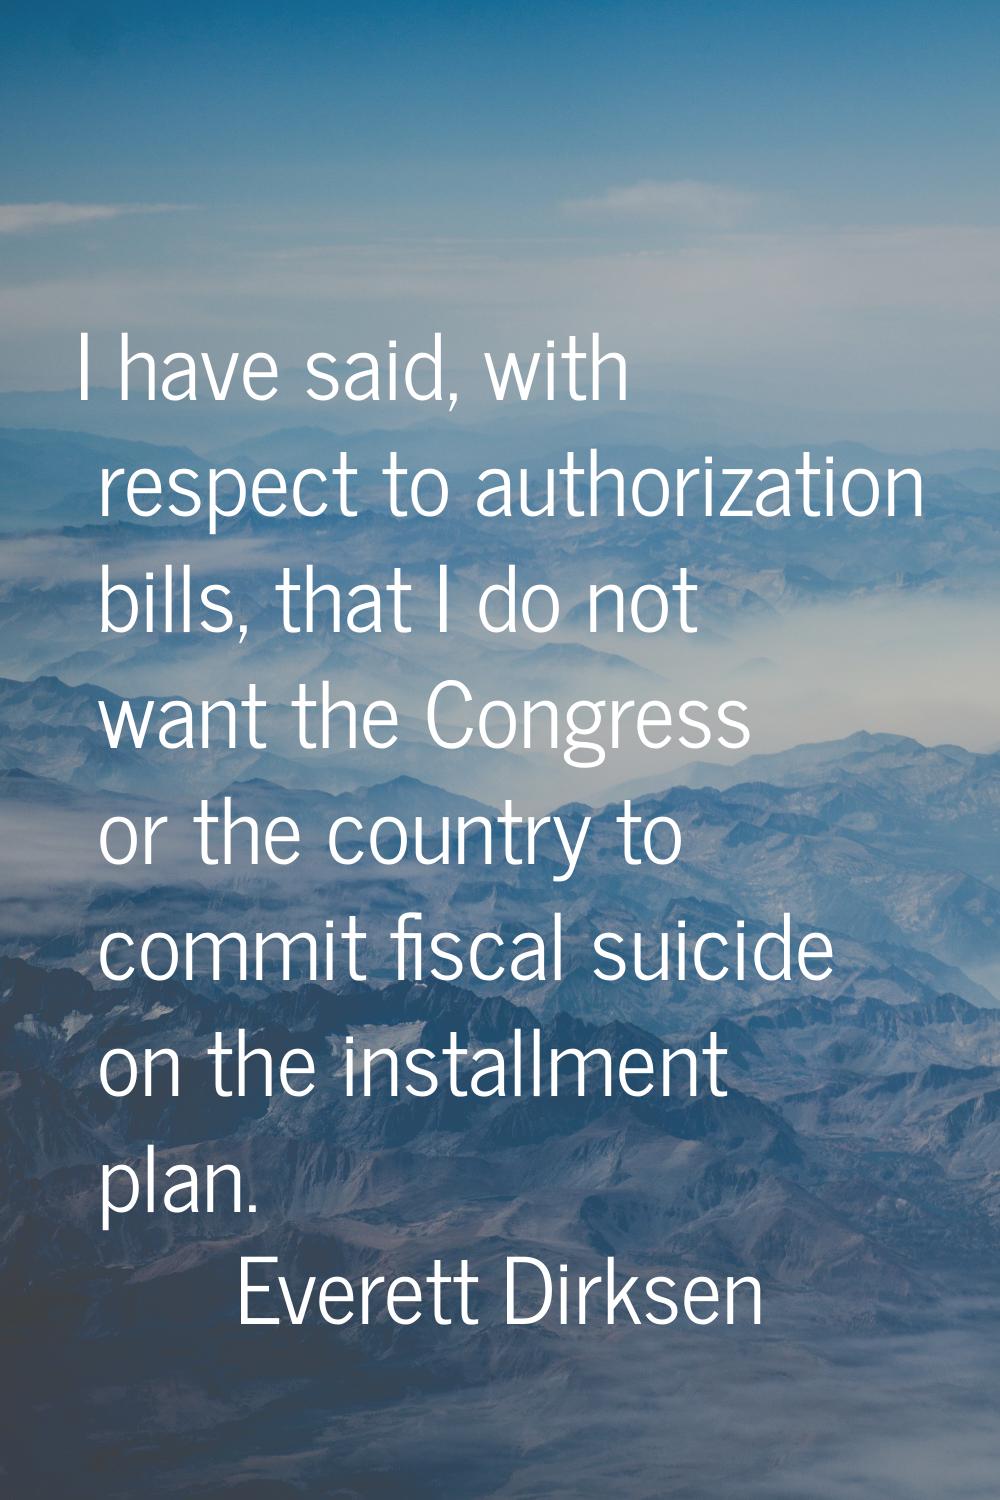 I have said, with respect to authorization bills, that I do not want the Congress or the country to